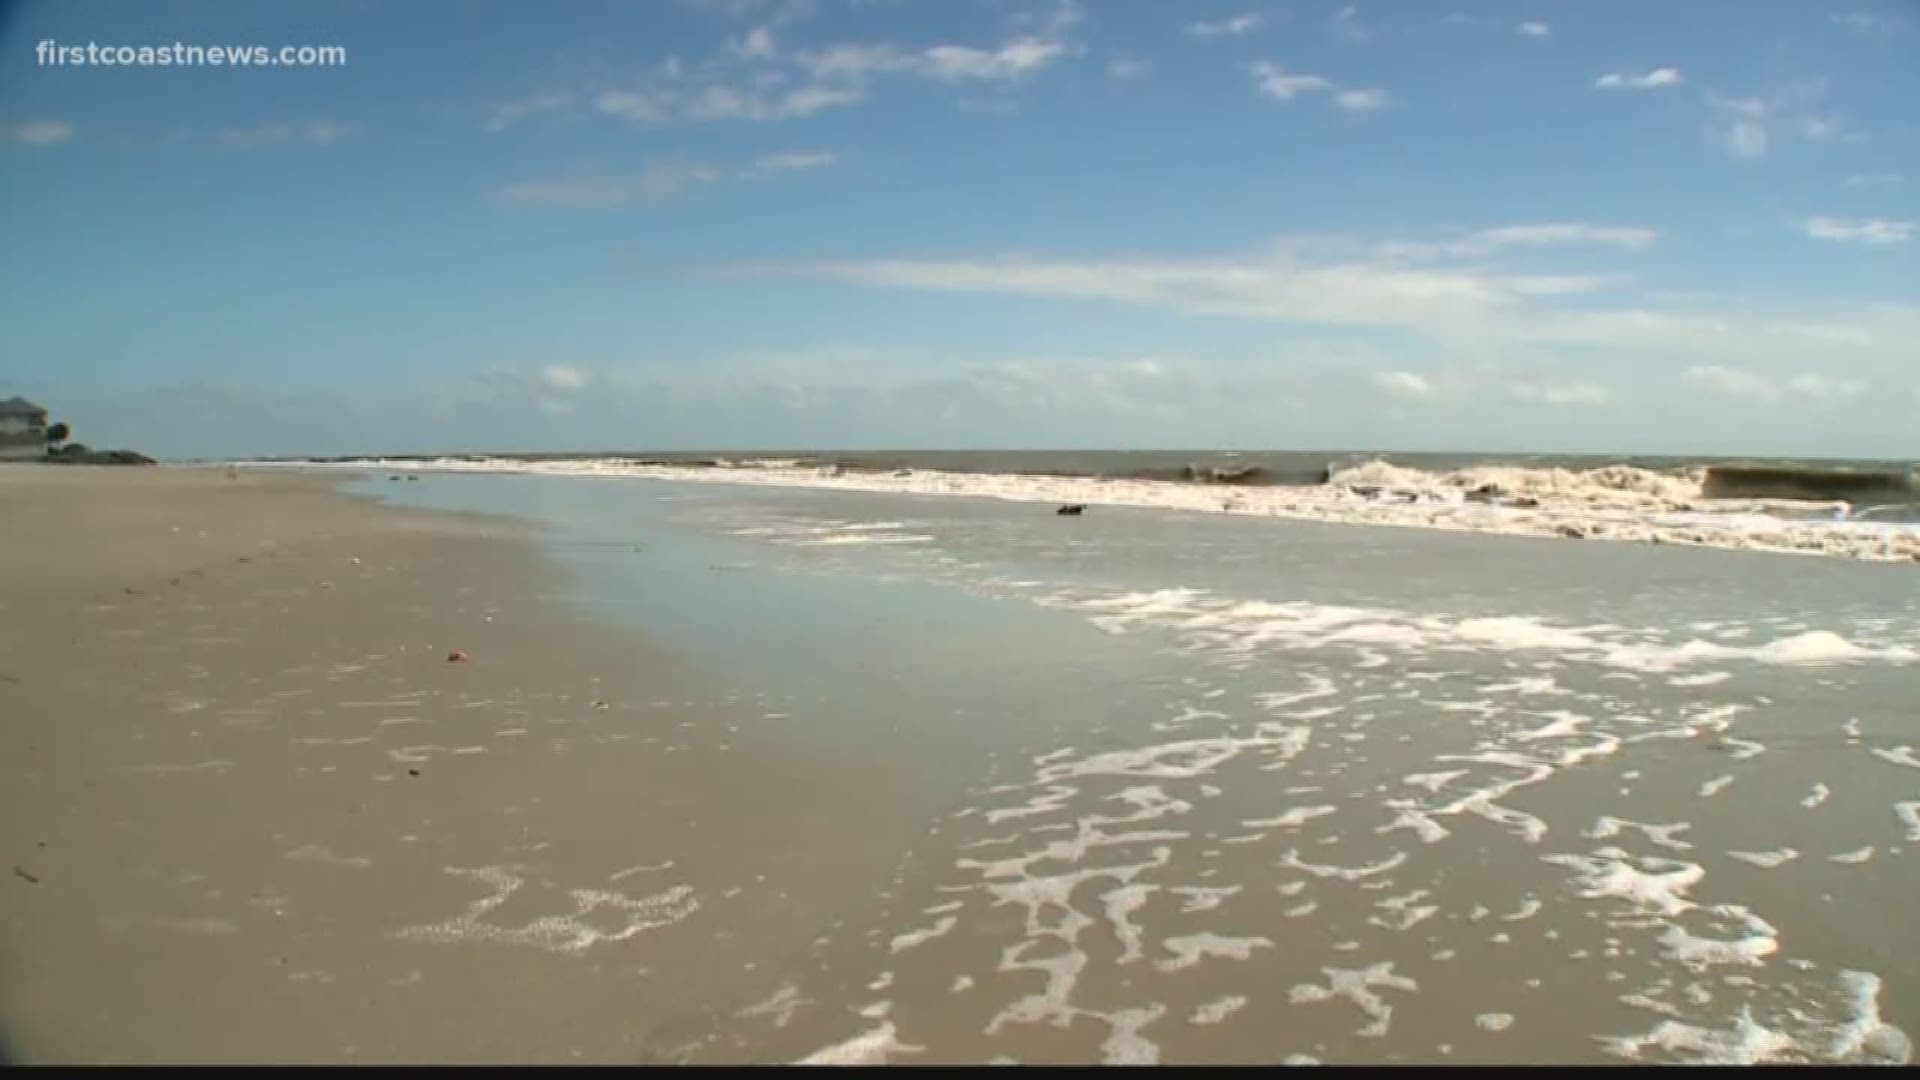 The Glynn County Board of Commissioners had closed all county beaches Tuesday, but Gov. Brian Kemp's Thursday order means beaches will now be open for exercise only.